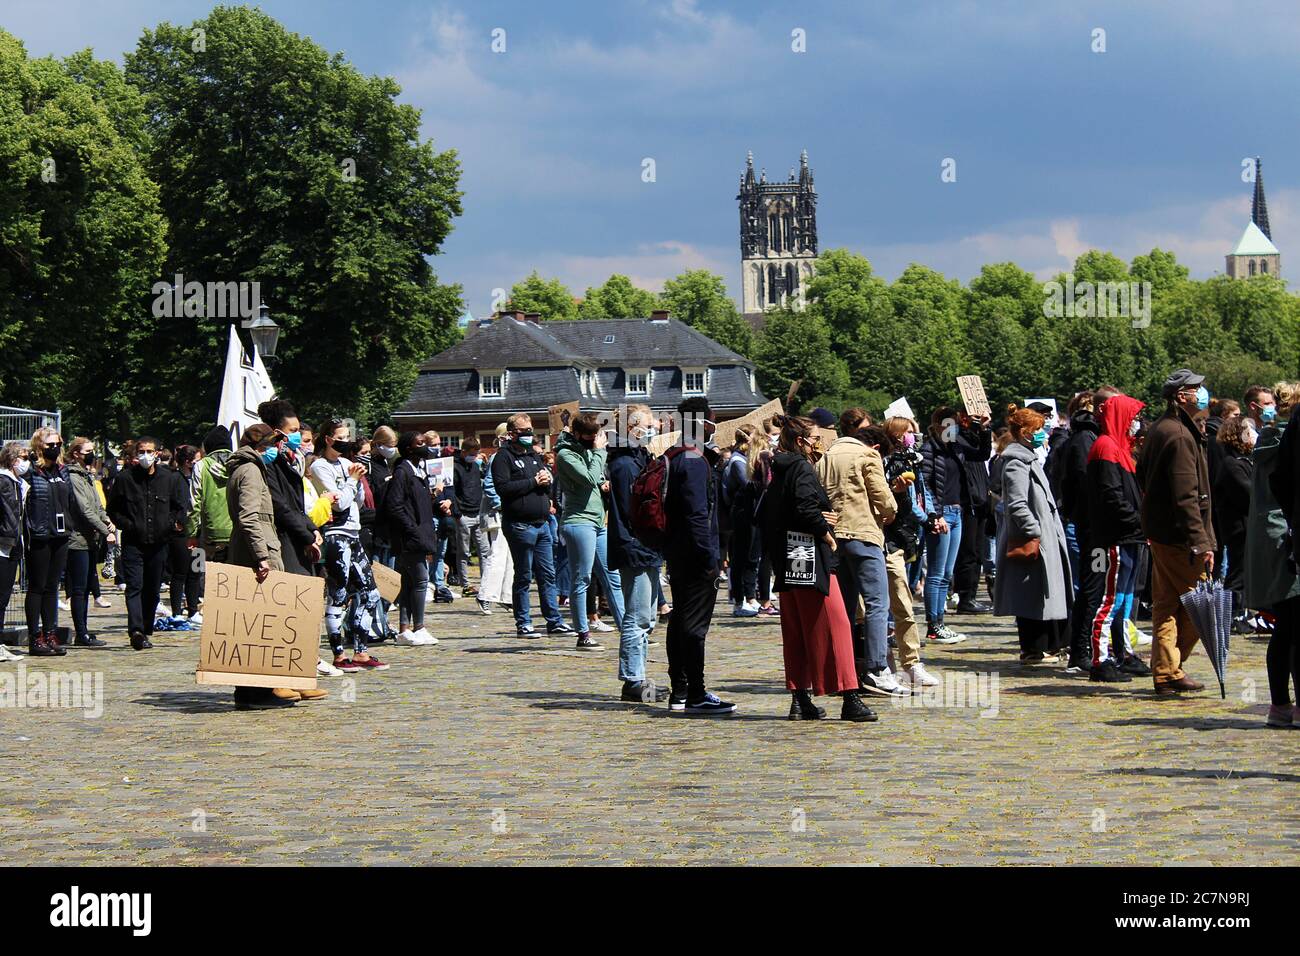 Peaceful Black Lives Matter Protest on Schlossplatz. Protest in response to George Floyd's death and police violence against black people. Stock Photo